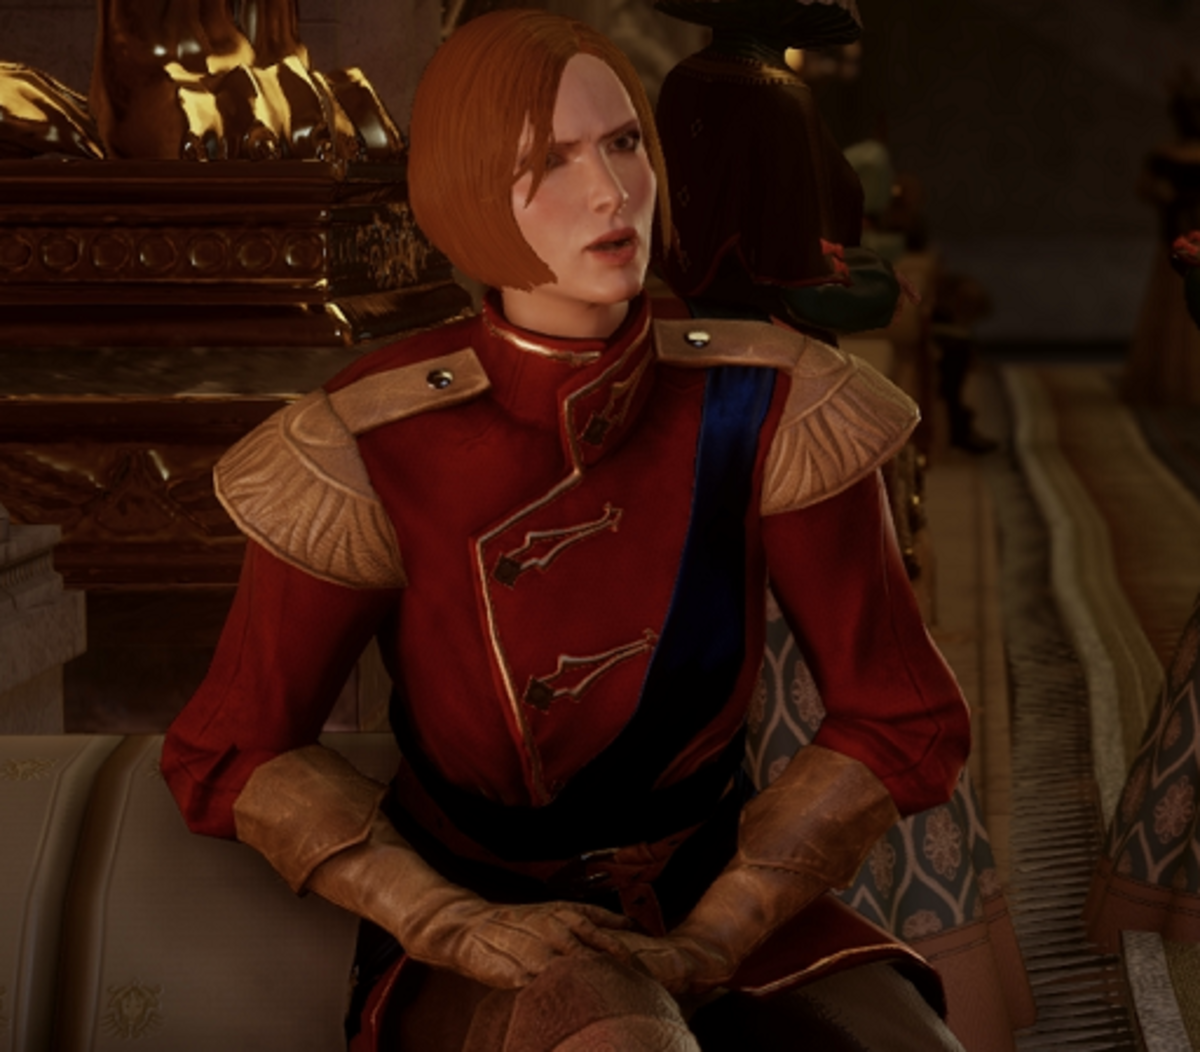 Dragon Age™ Inquisition - Wicked Eyes and Wicked Hearts Full Walkthrough Guide - Quest Stage: Speak with Leliana - 7315991